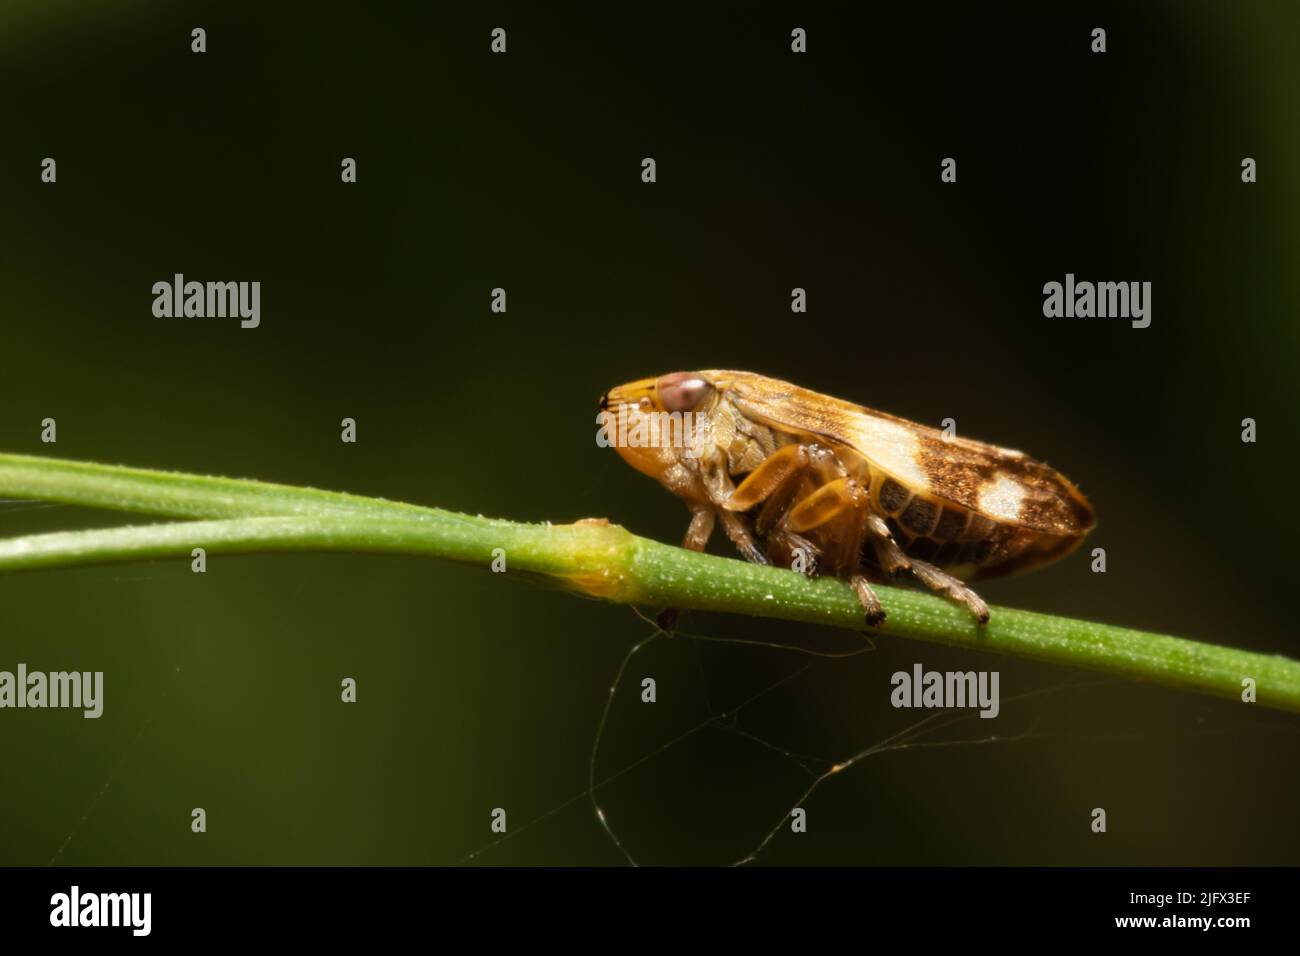 Anoscopus albifrons, which is a type of Leaf hopper in the family Cicadellidae, perch on a grass stem. Stock Photo